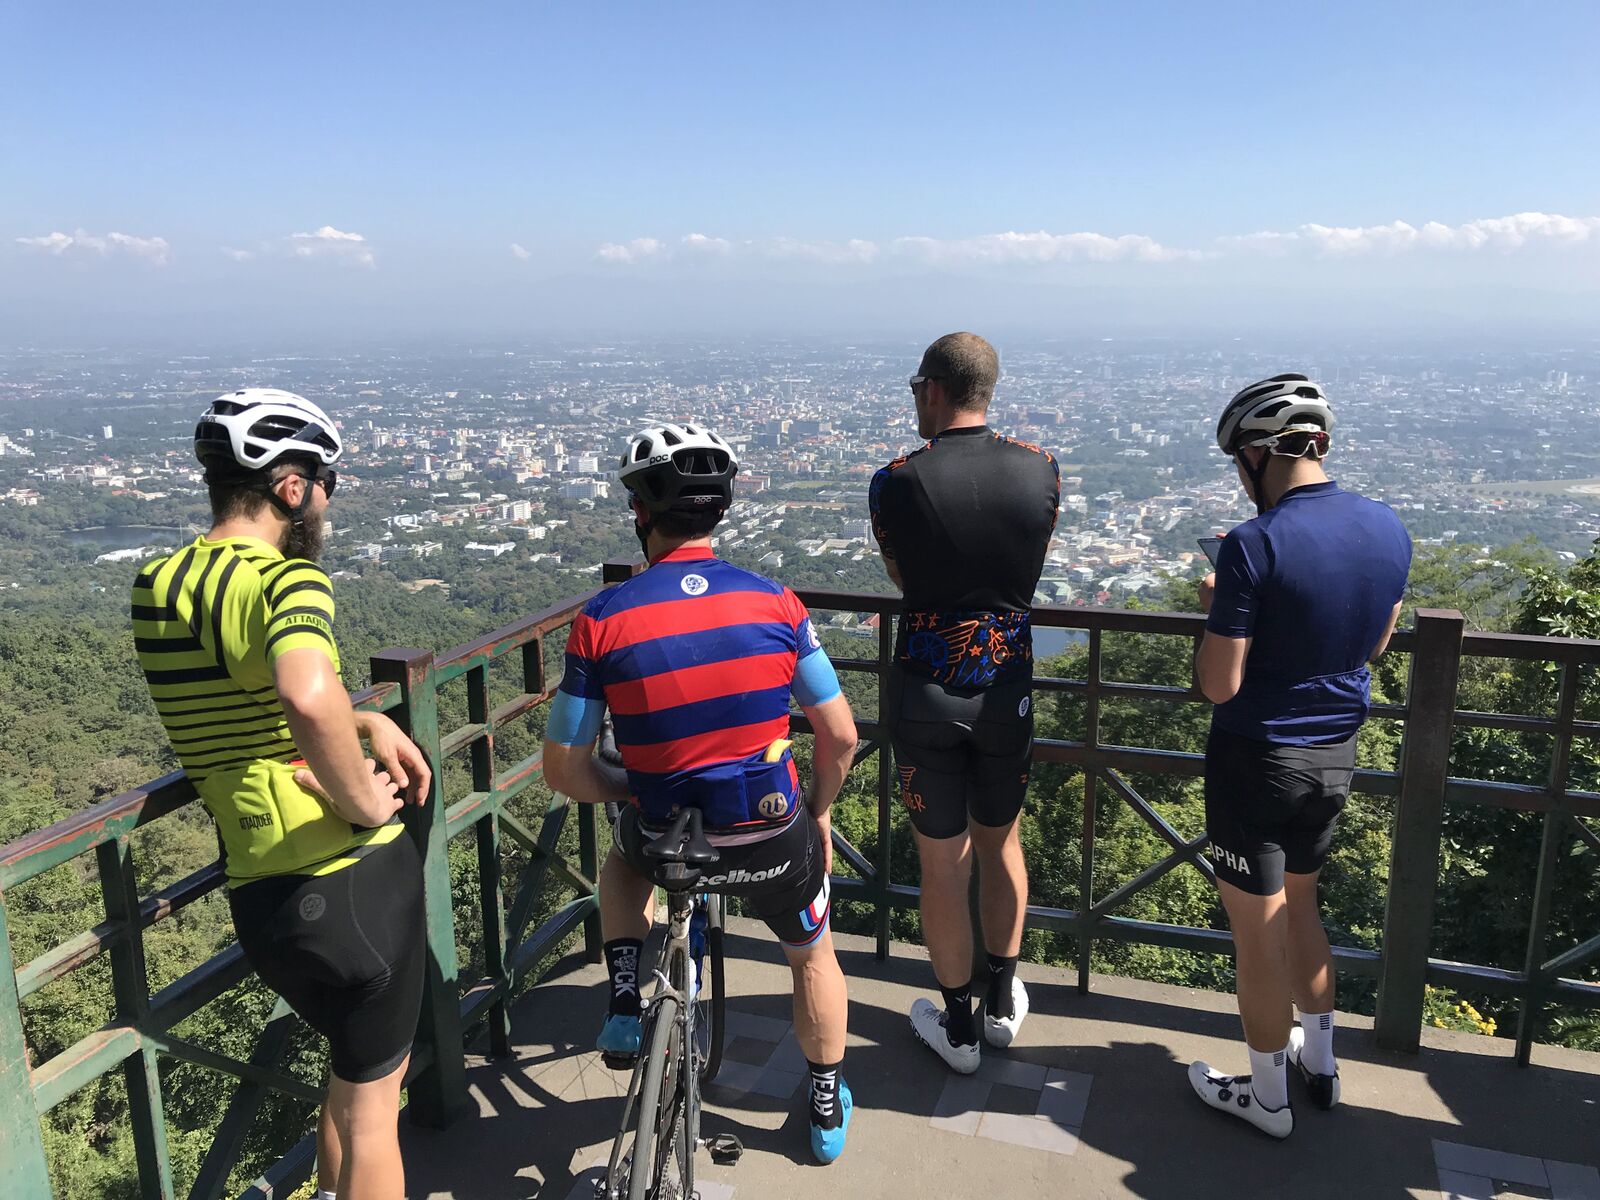 Went for a few extras up to the Doi Suthep lookout – the term dad pace is born